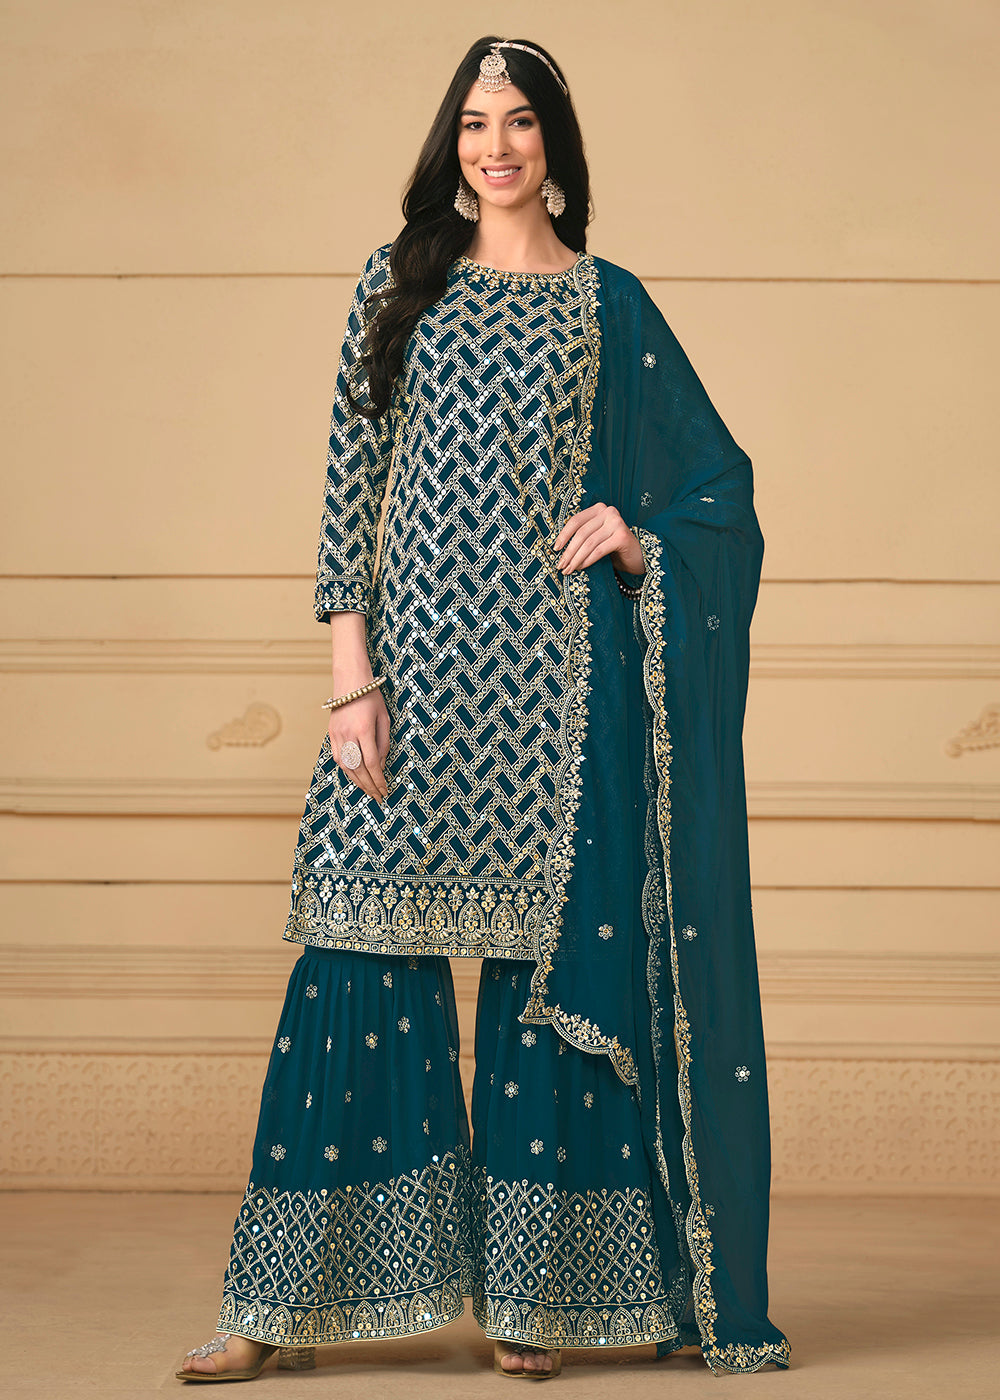 Shop Now Georgette Peacock Blue Embroidered Gharara Style Suit Online at Empress Clothing in USA, UK, Canada, Italy & Worldwide.